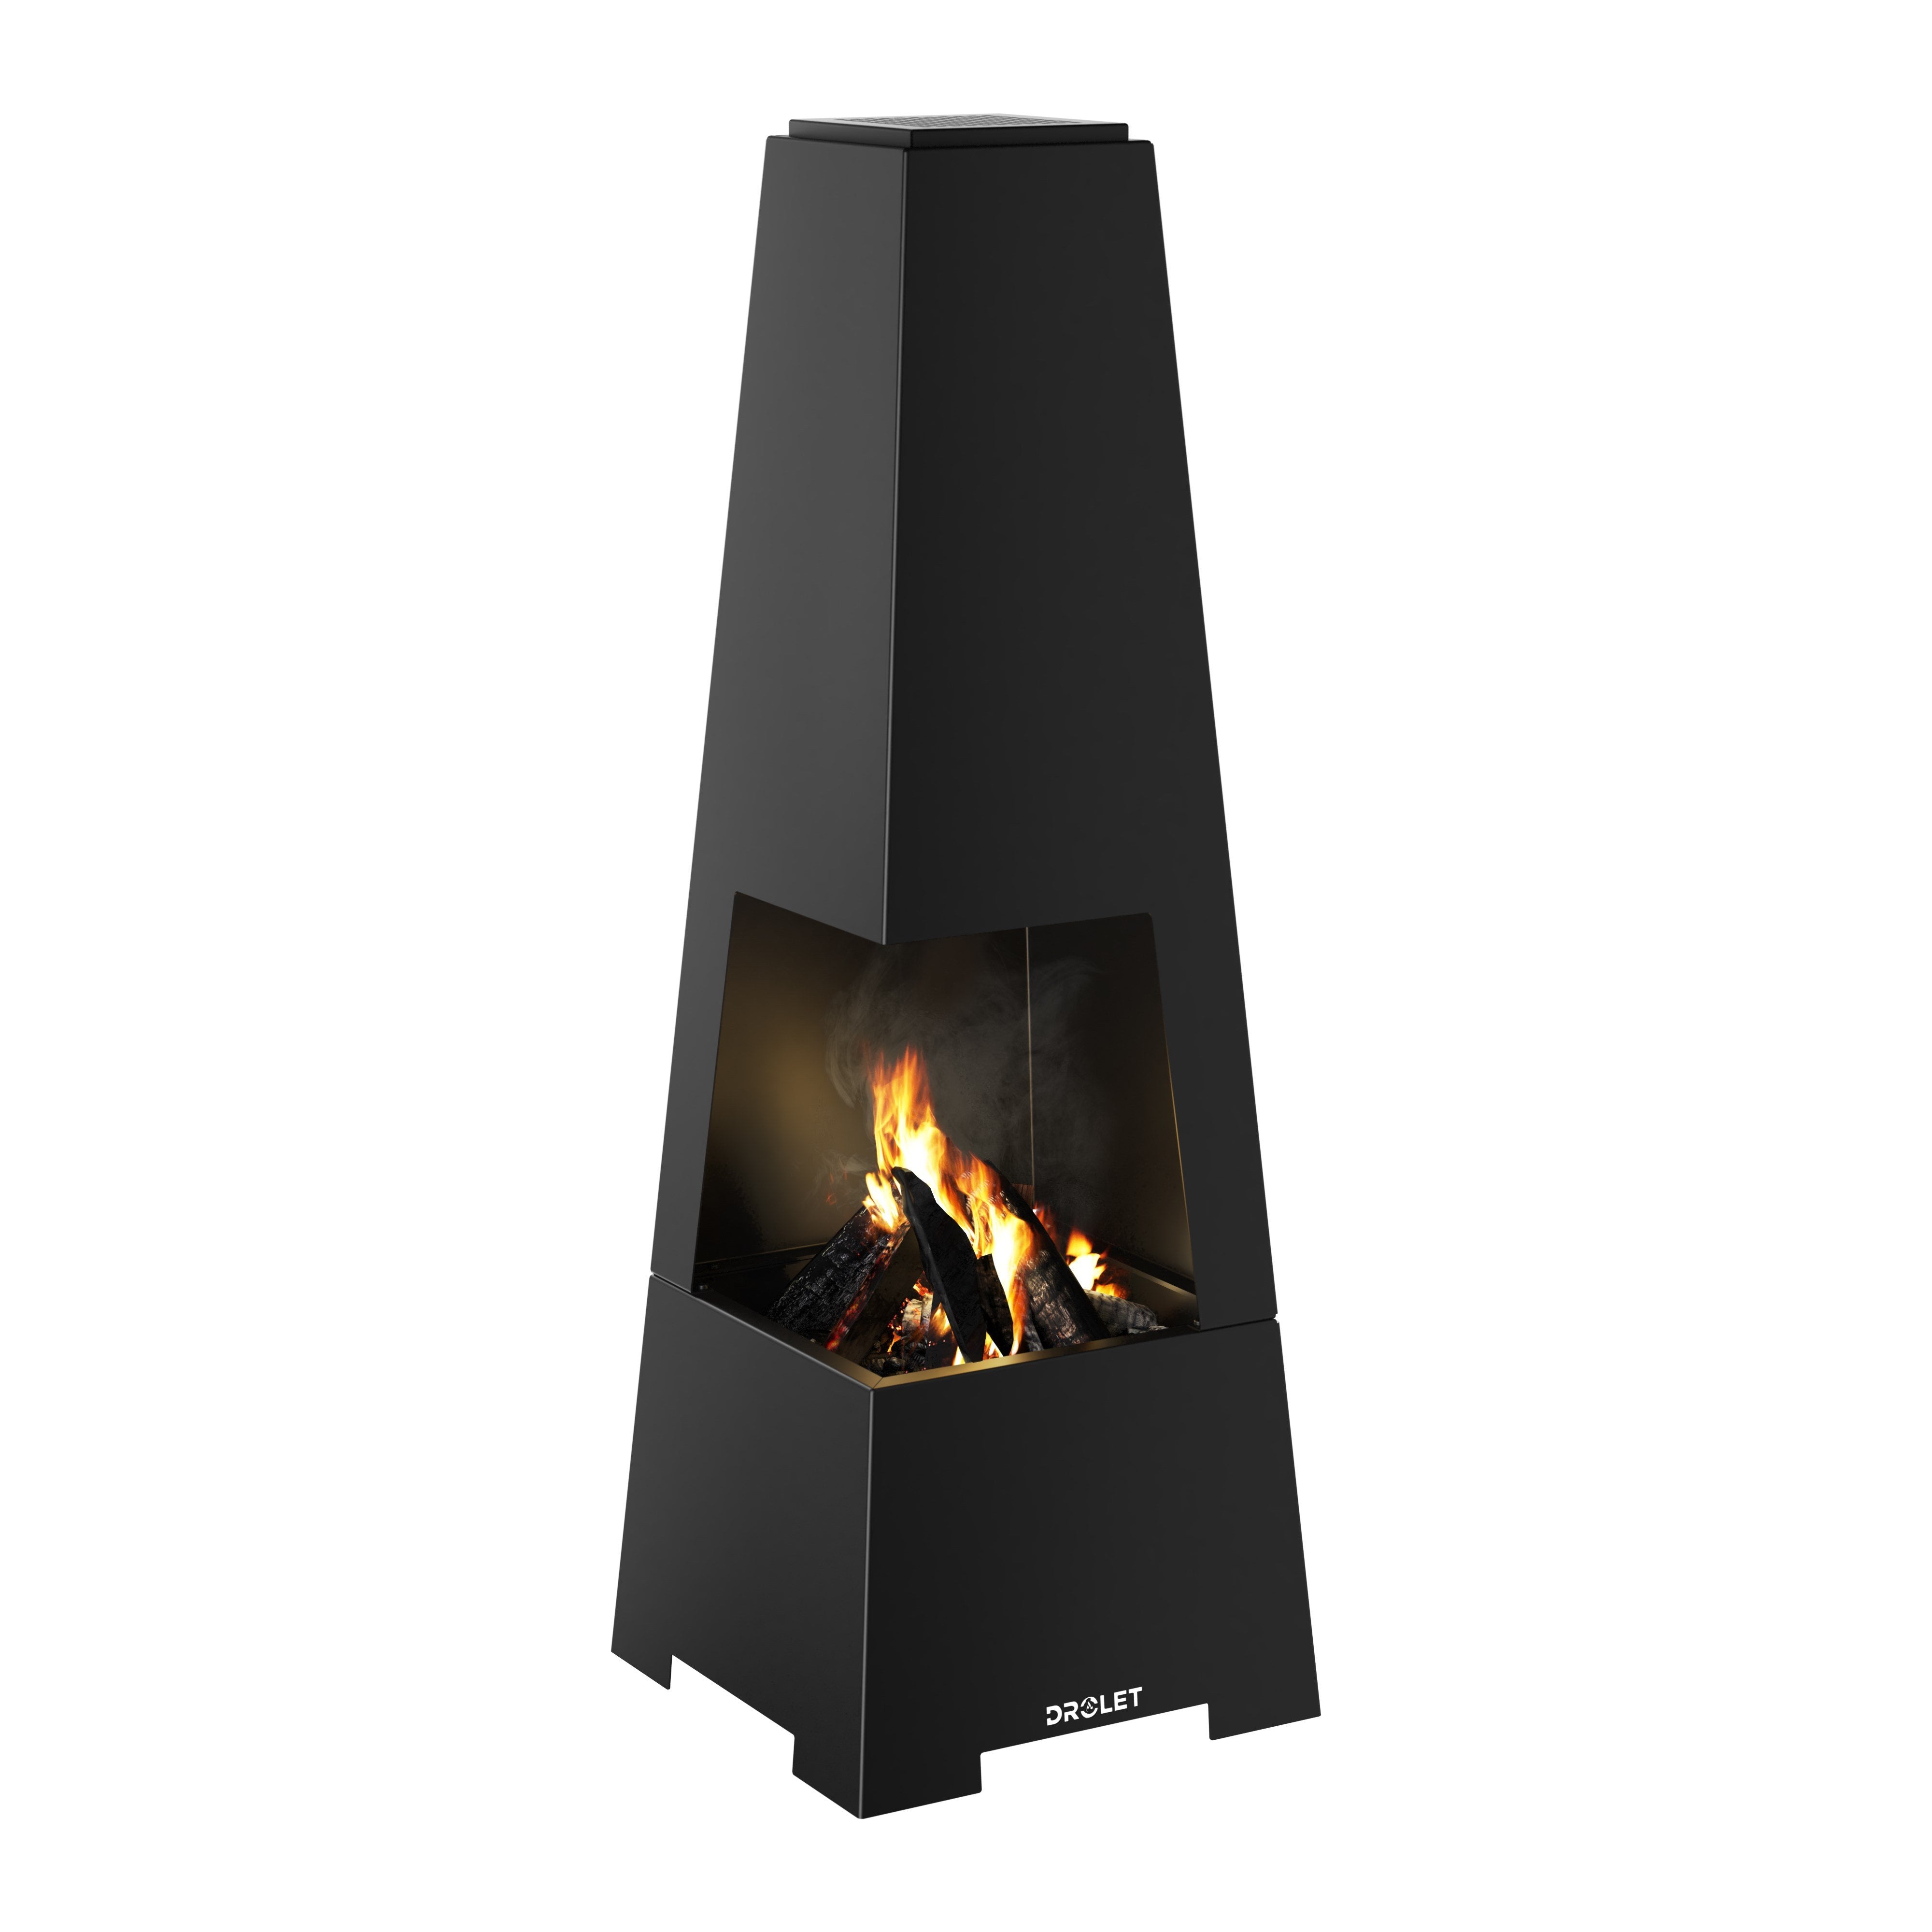 Drolet, Drolet Bora Outdoor Wood Burning Fireplace New